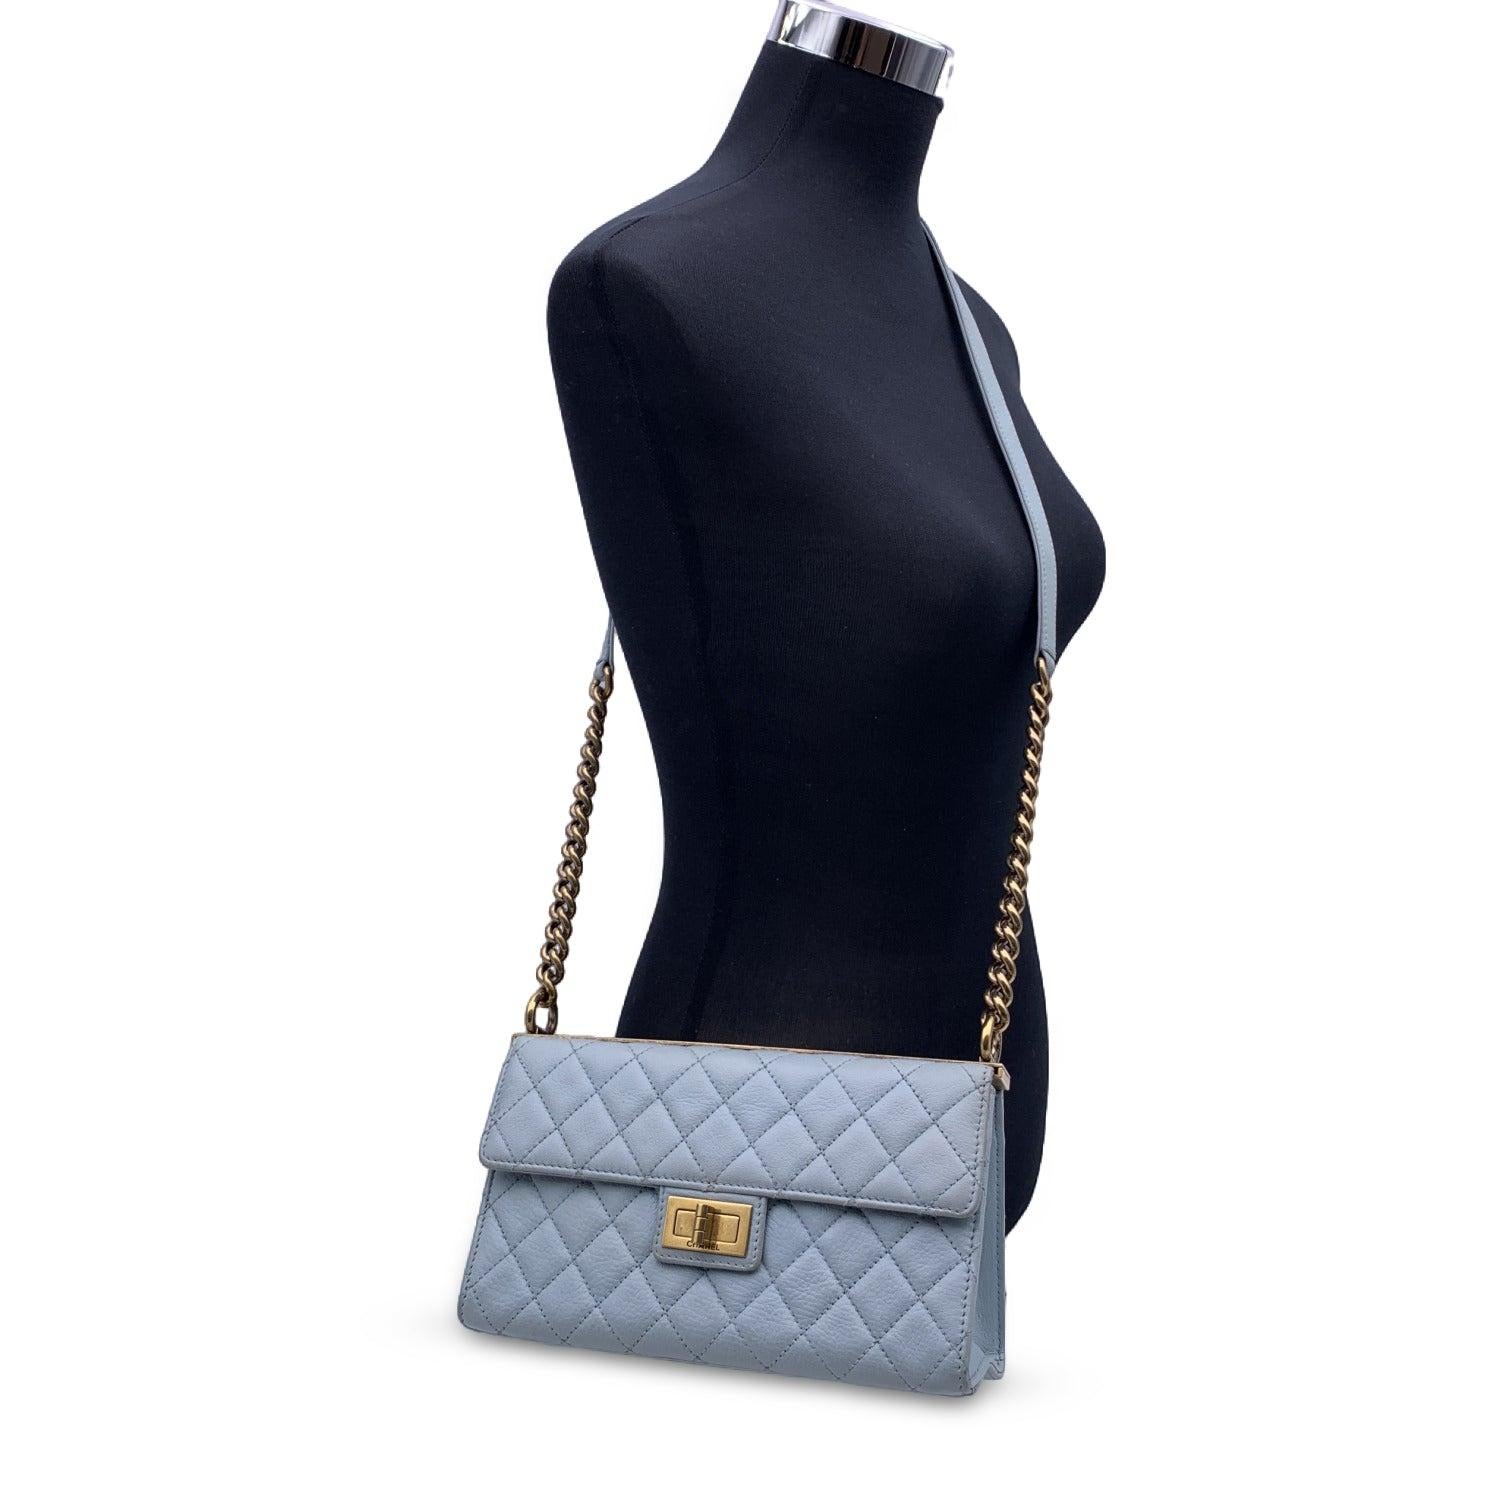 Gray Chanel Light Blue Quilted Leather Trendy Reissue Shoulder Bag